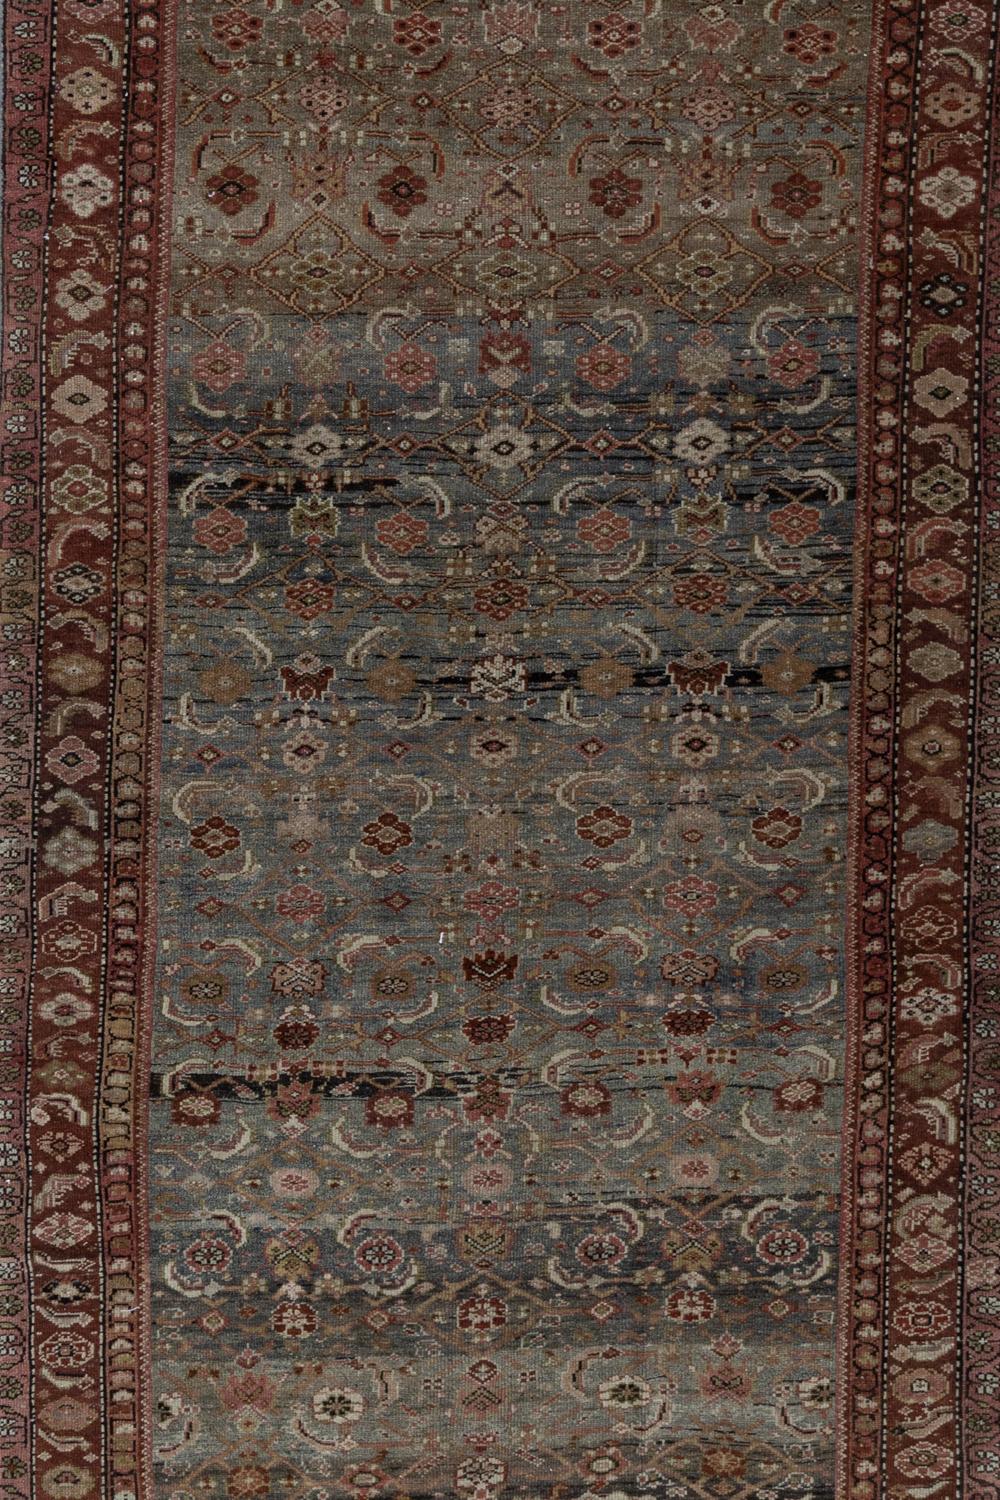 Antique Persian Gallery Rug In Good Condition For Sale In West Palm Beach, FL